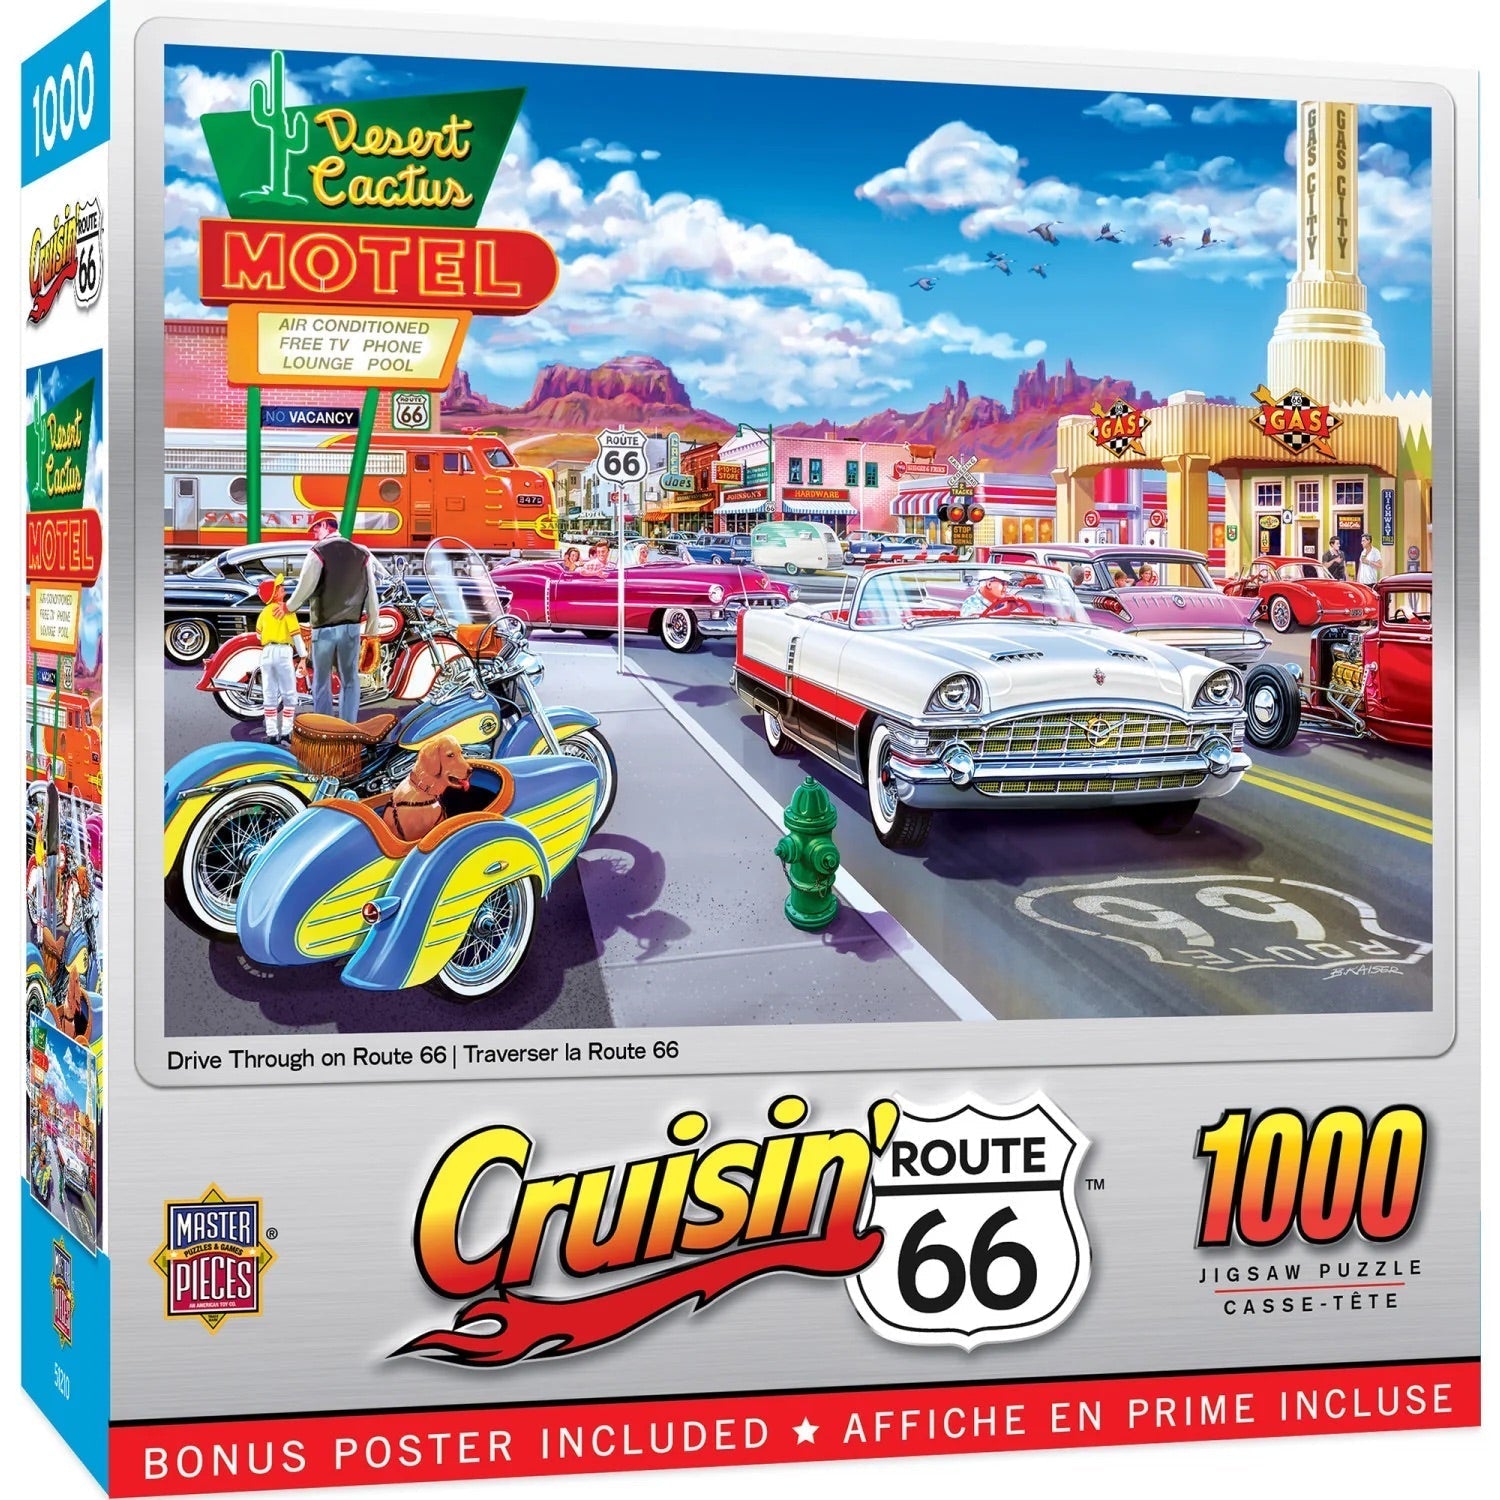  CRUISIN' ROUTE 66 - DRIVE THROUGH ON RT. 66 1000 PIECE JIGSAW PUZZLE